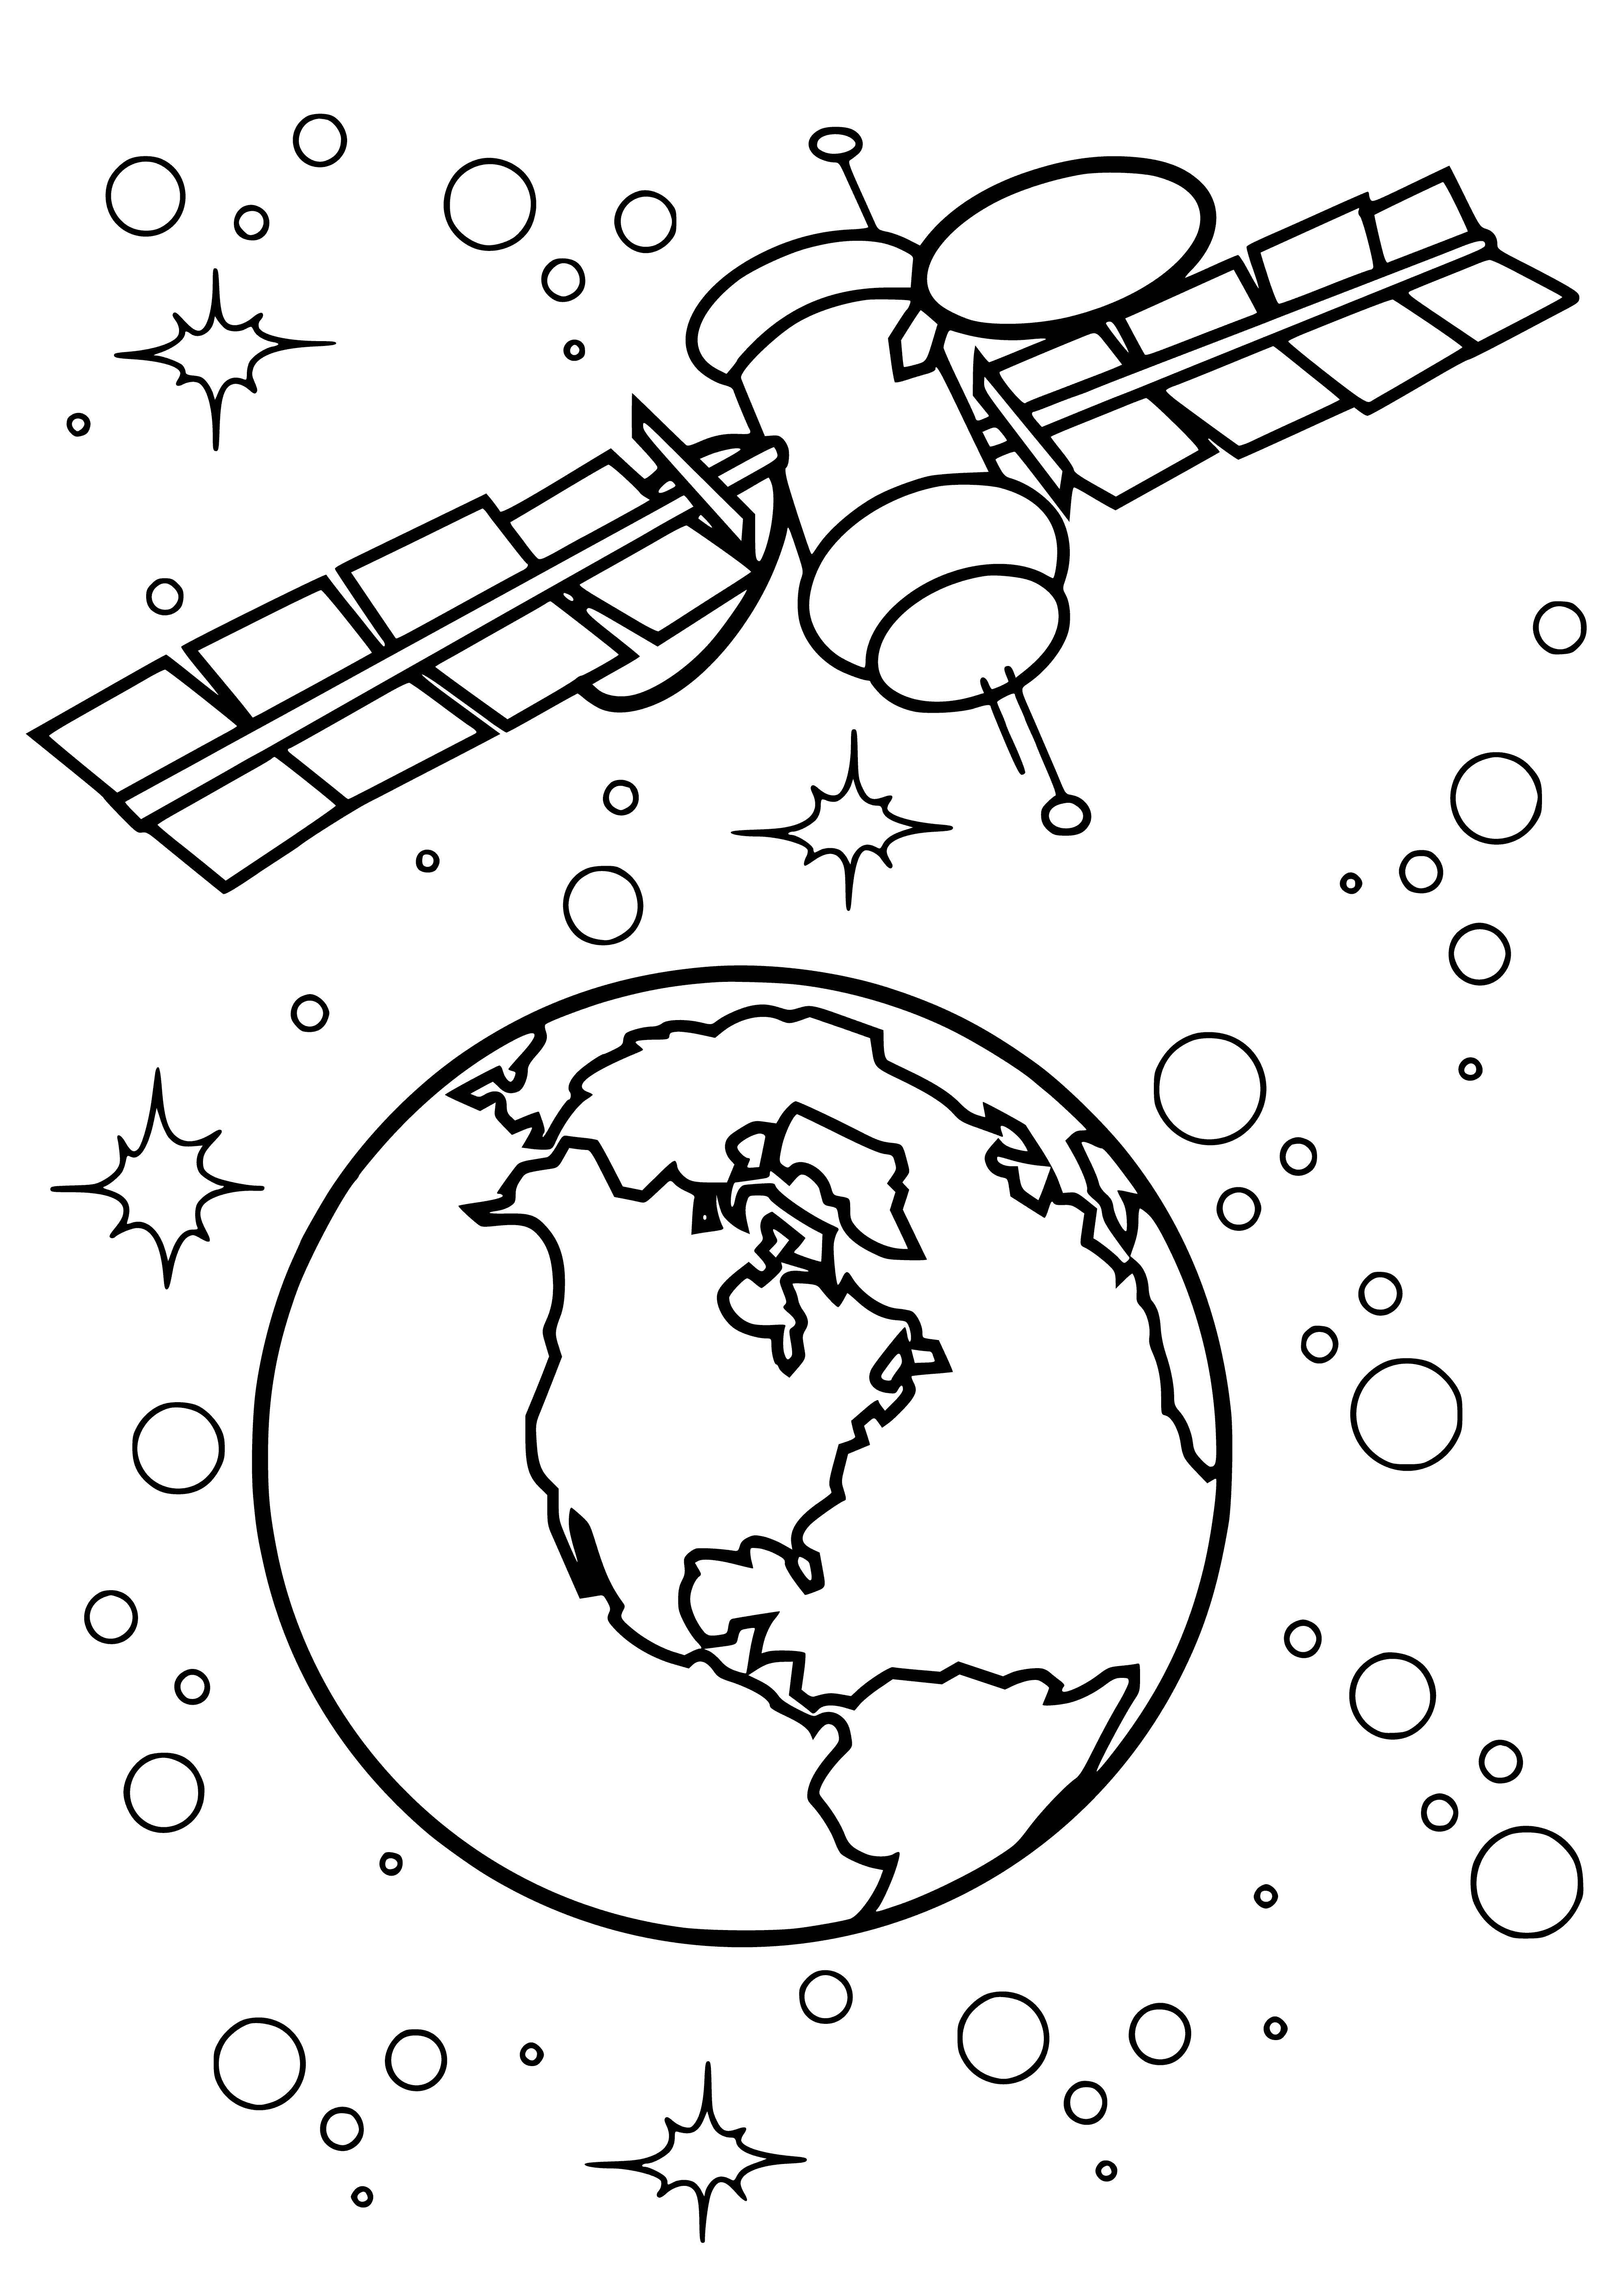 Station in orbit coloring page